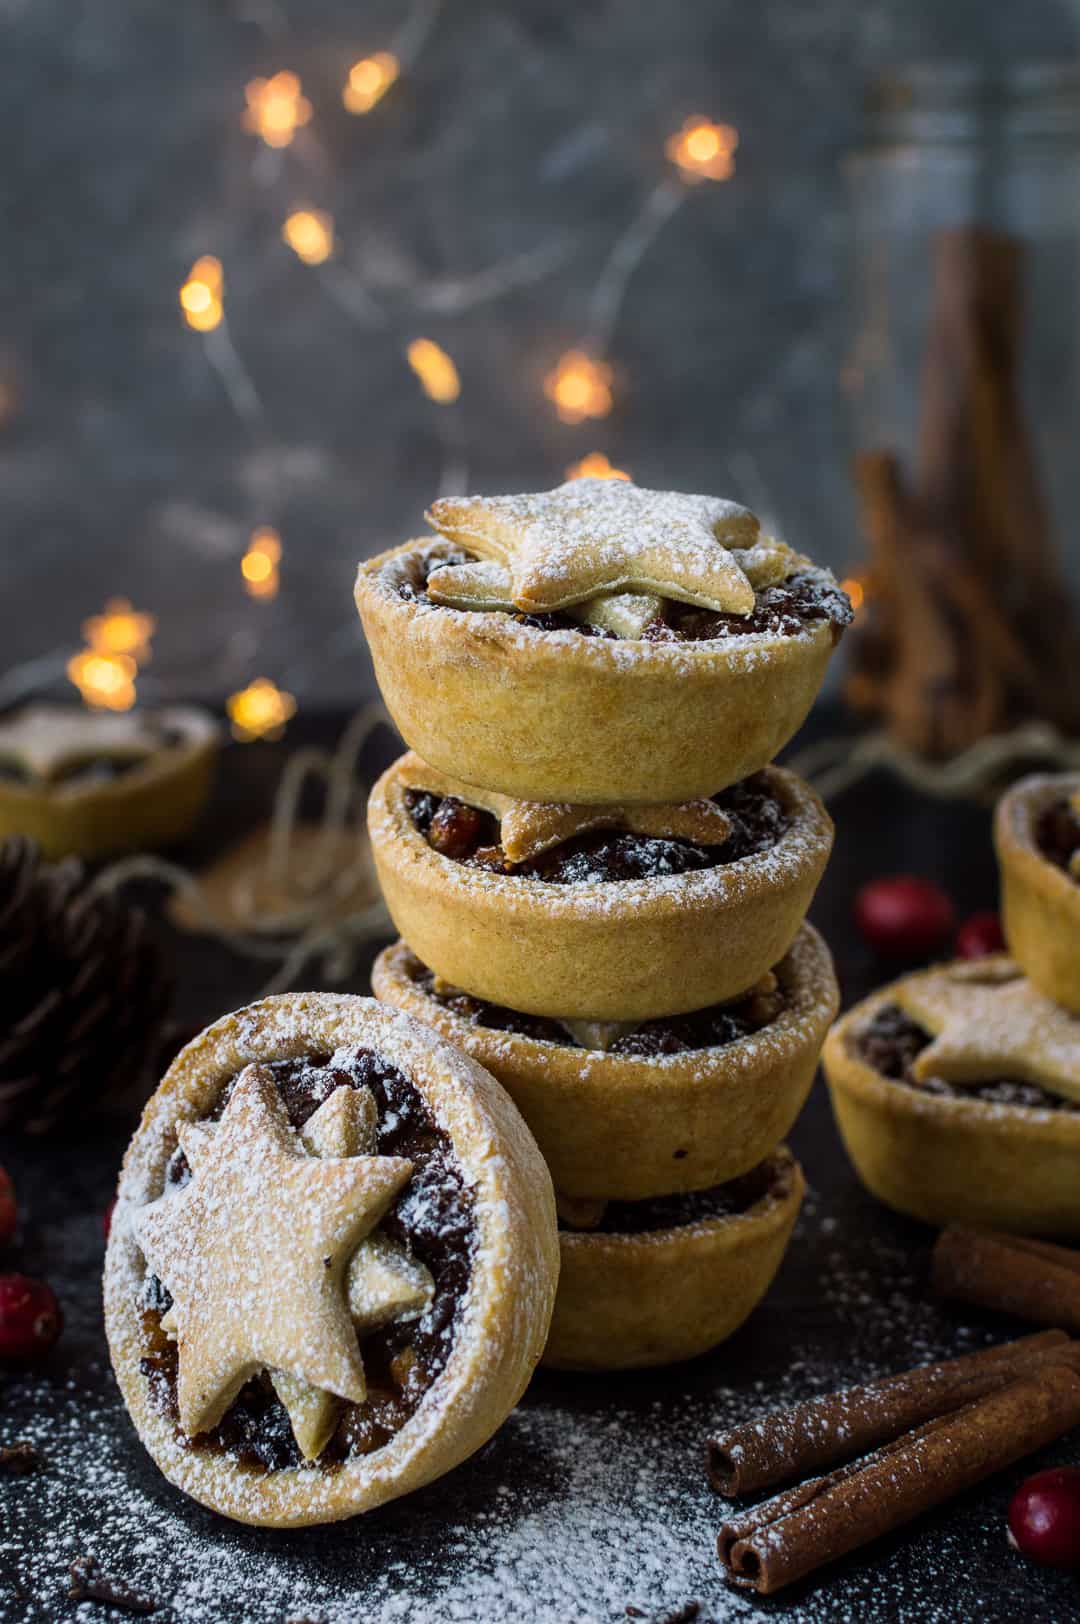 Photograph of a stack of lower calorie vegan mince pies with fairy lights in the background.